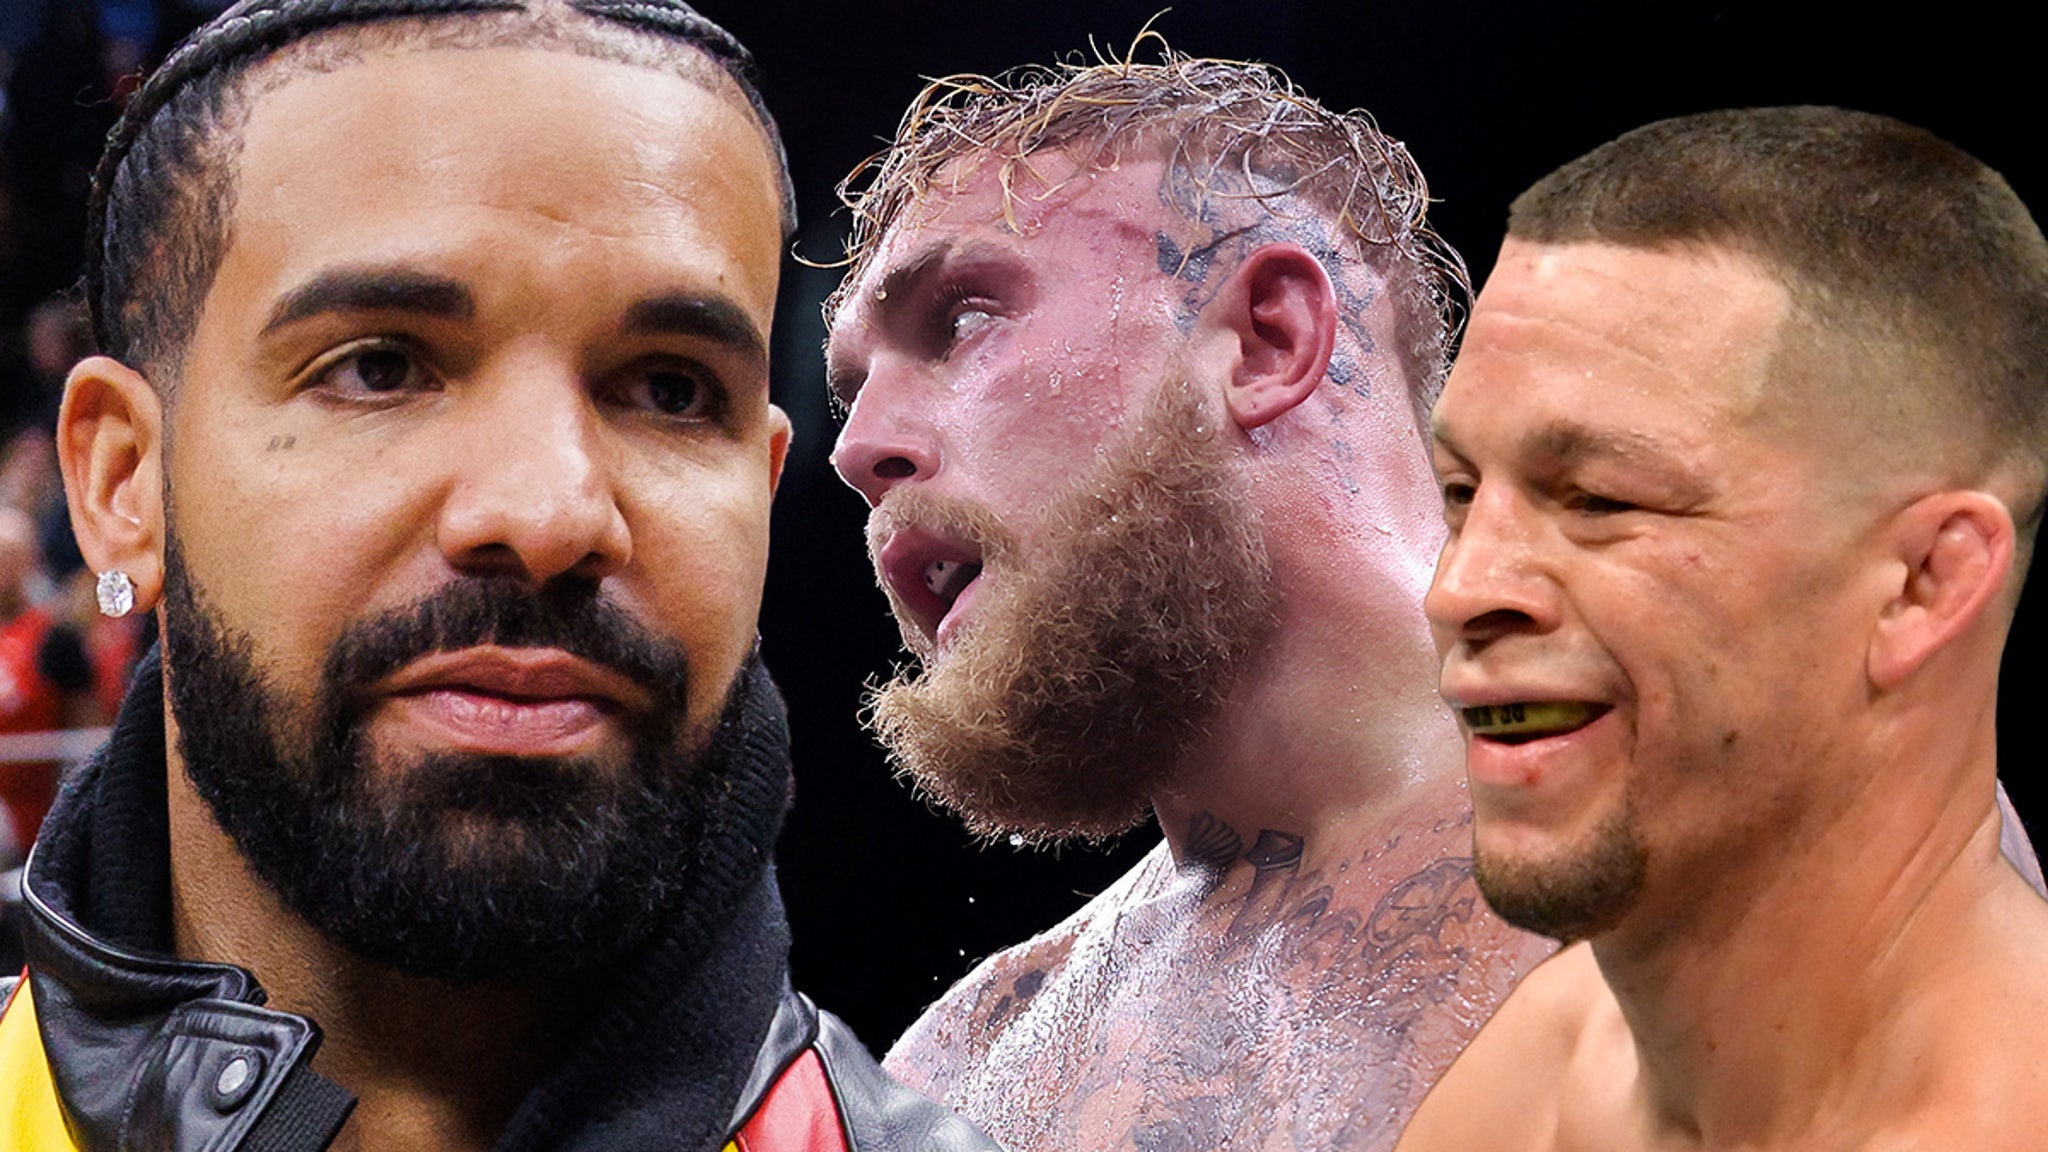 Drake Places $250k Bet On Jake Paul To Lose Fight With Nate Diaz, $1 Million Payout